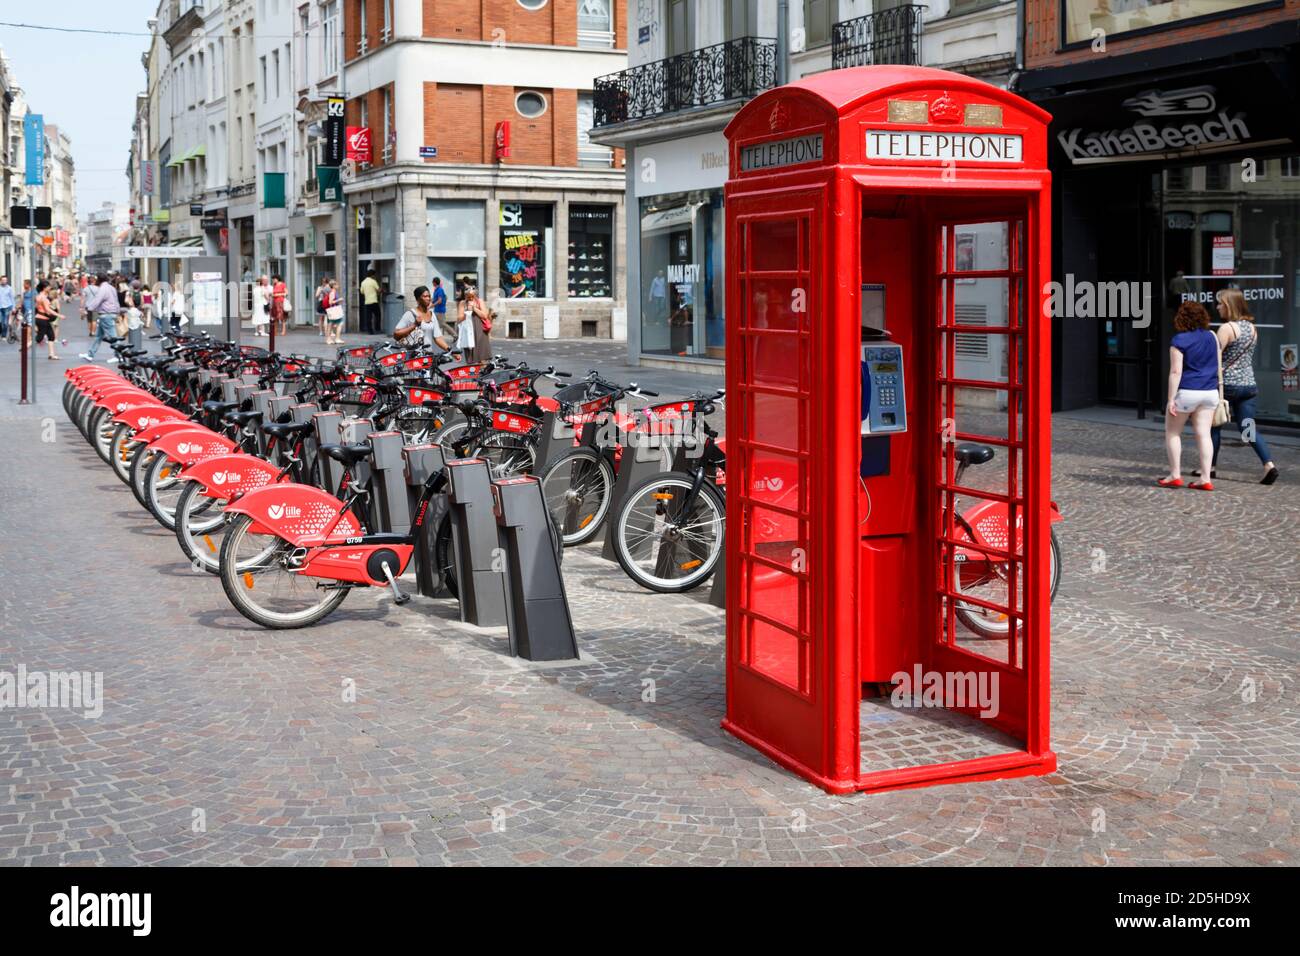 LILLE, FRANCE - July 18, 2013. Red British telephone box and free bike rental station in a street in Lille, France Stock Photo